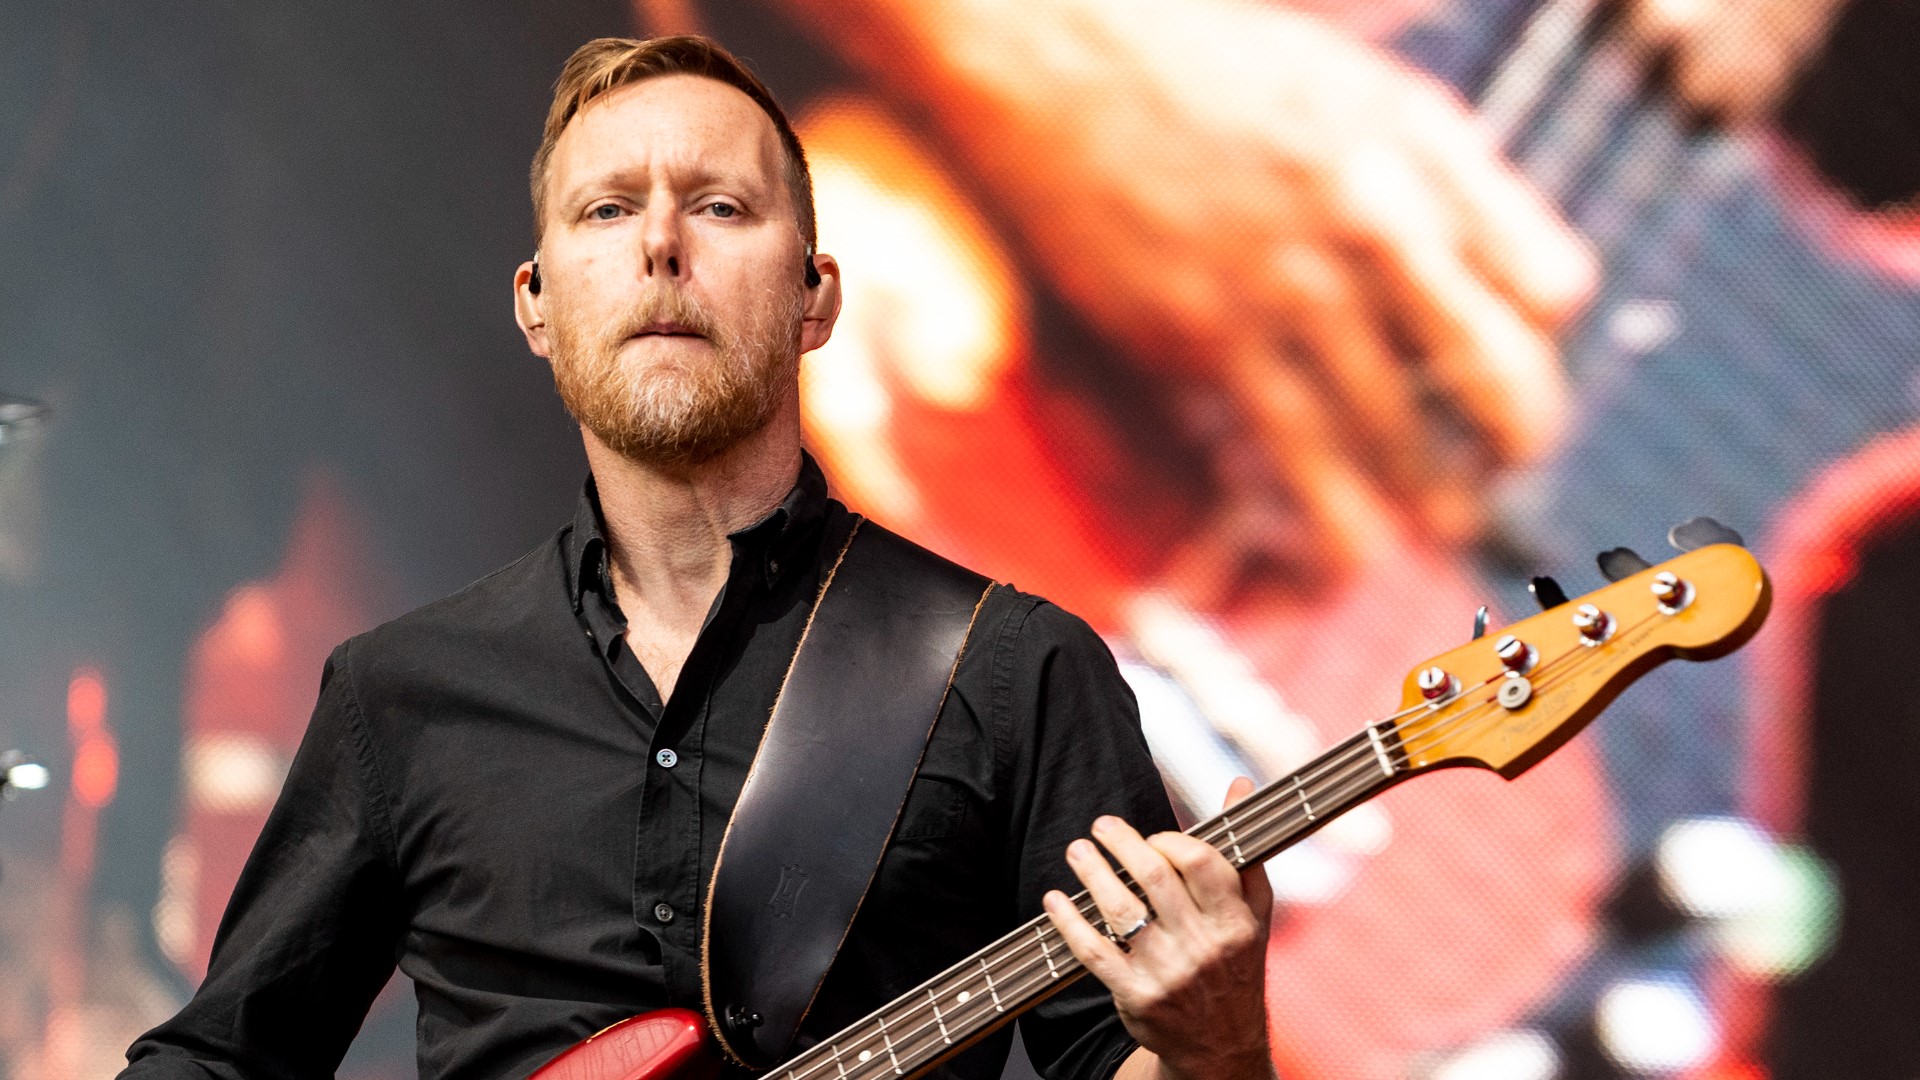 Nate Mendel grew up in Richland and played in Seattle's 'Sunny Day Real Estate' before joining Dave Grohl and company.